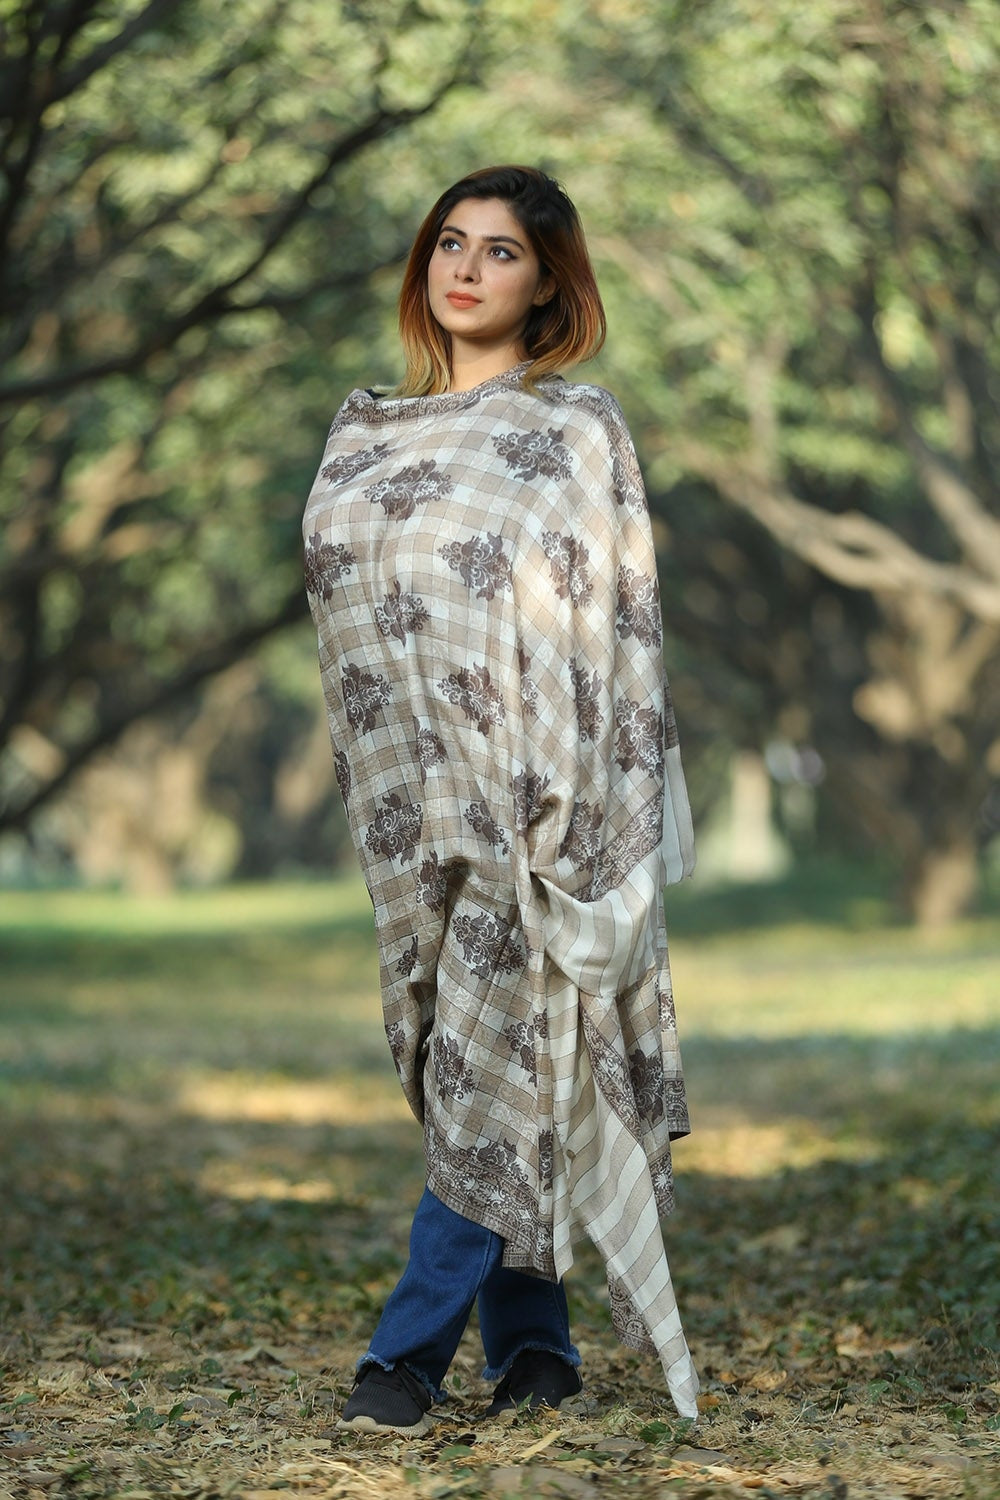 BEIGE COLOUR SHAWL DEFINES FEMINISM AND ADDS STEADY LOOK